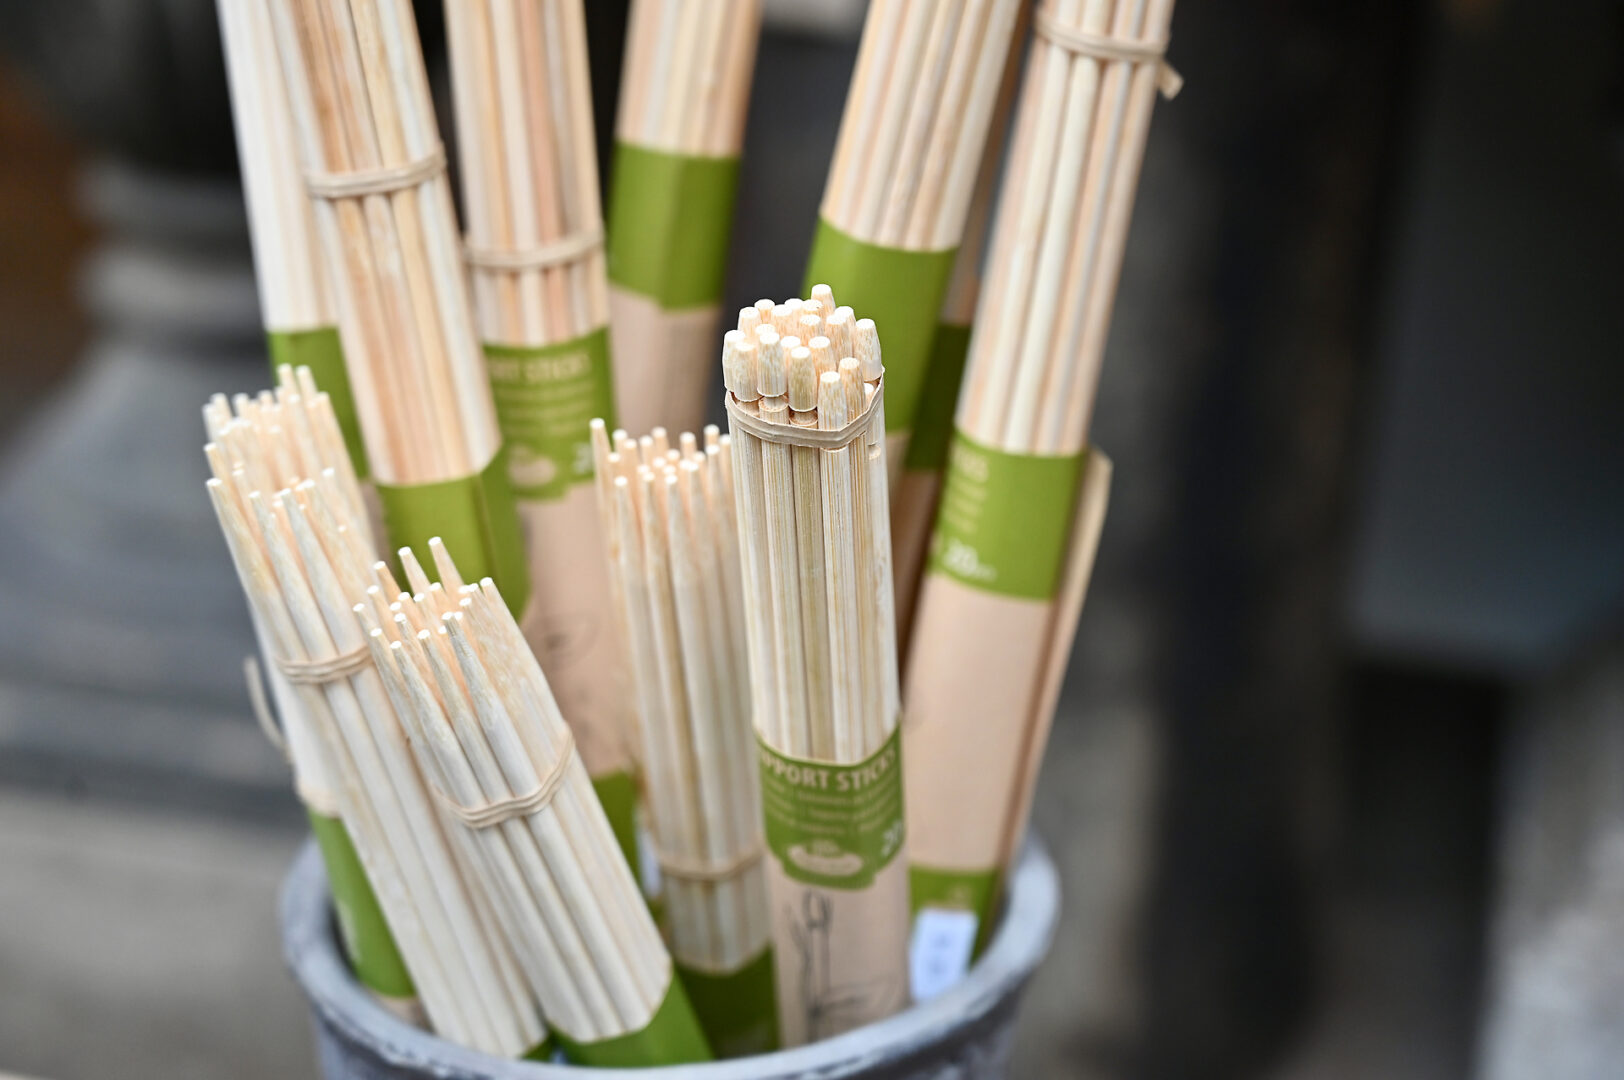 Set of 20 Bamboo Support Sticks